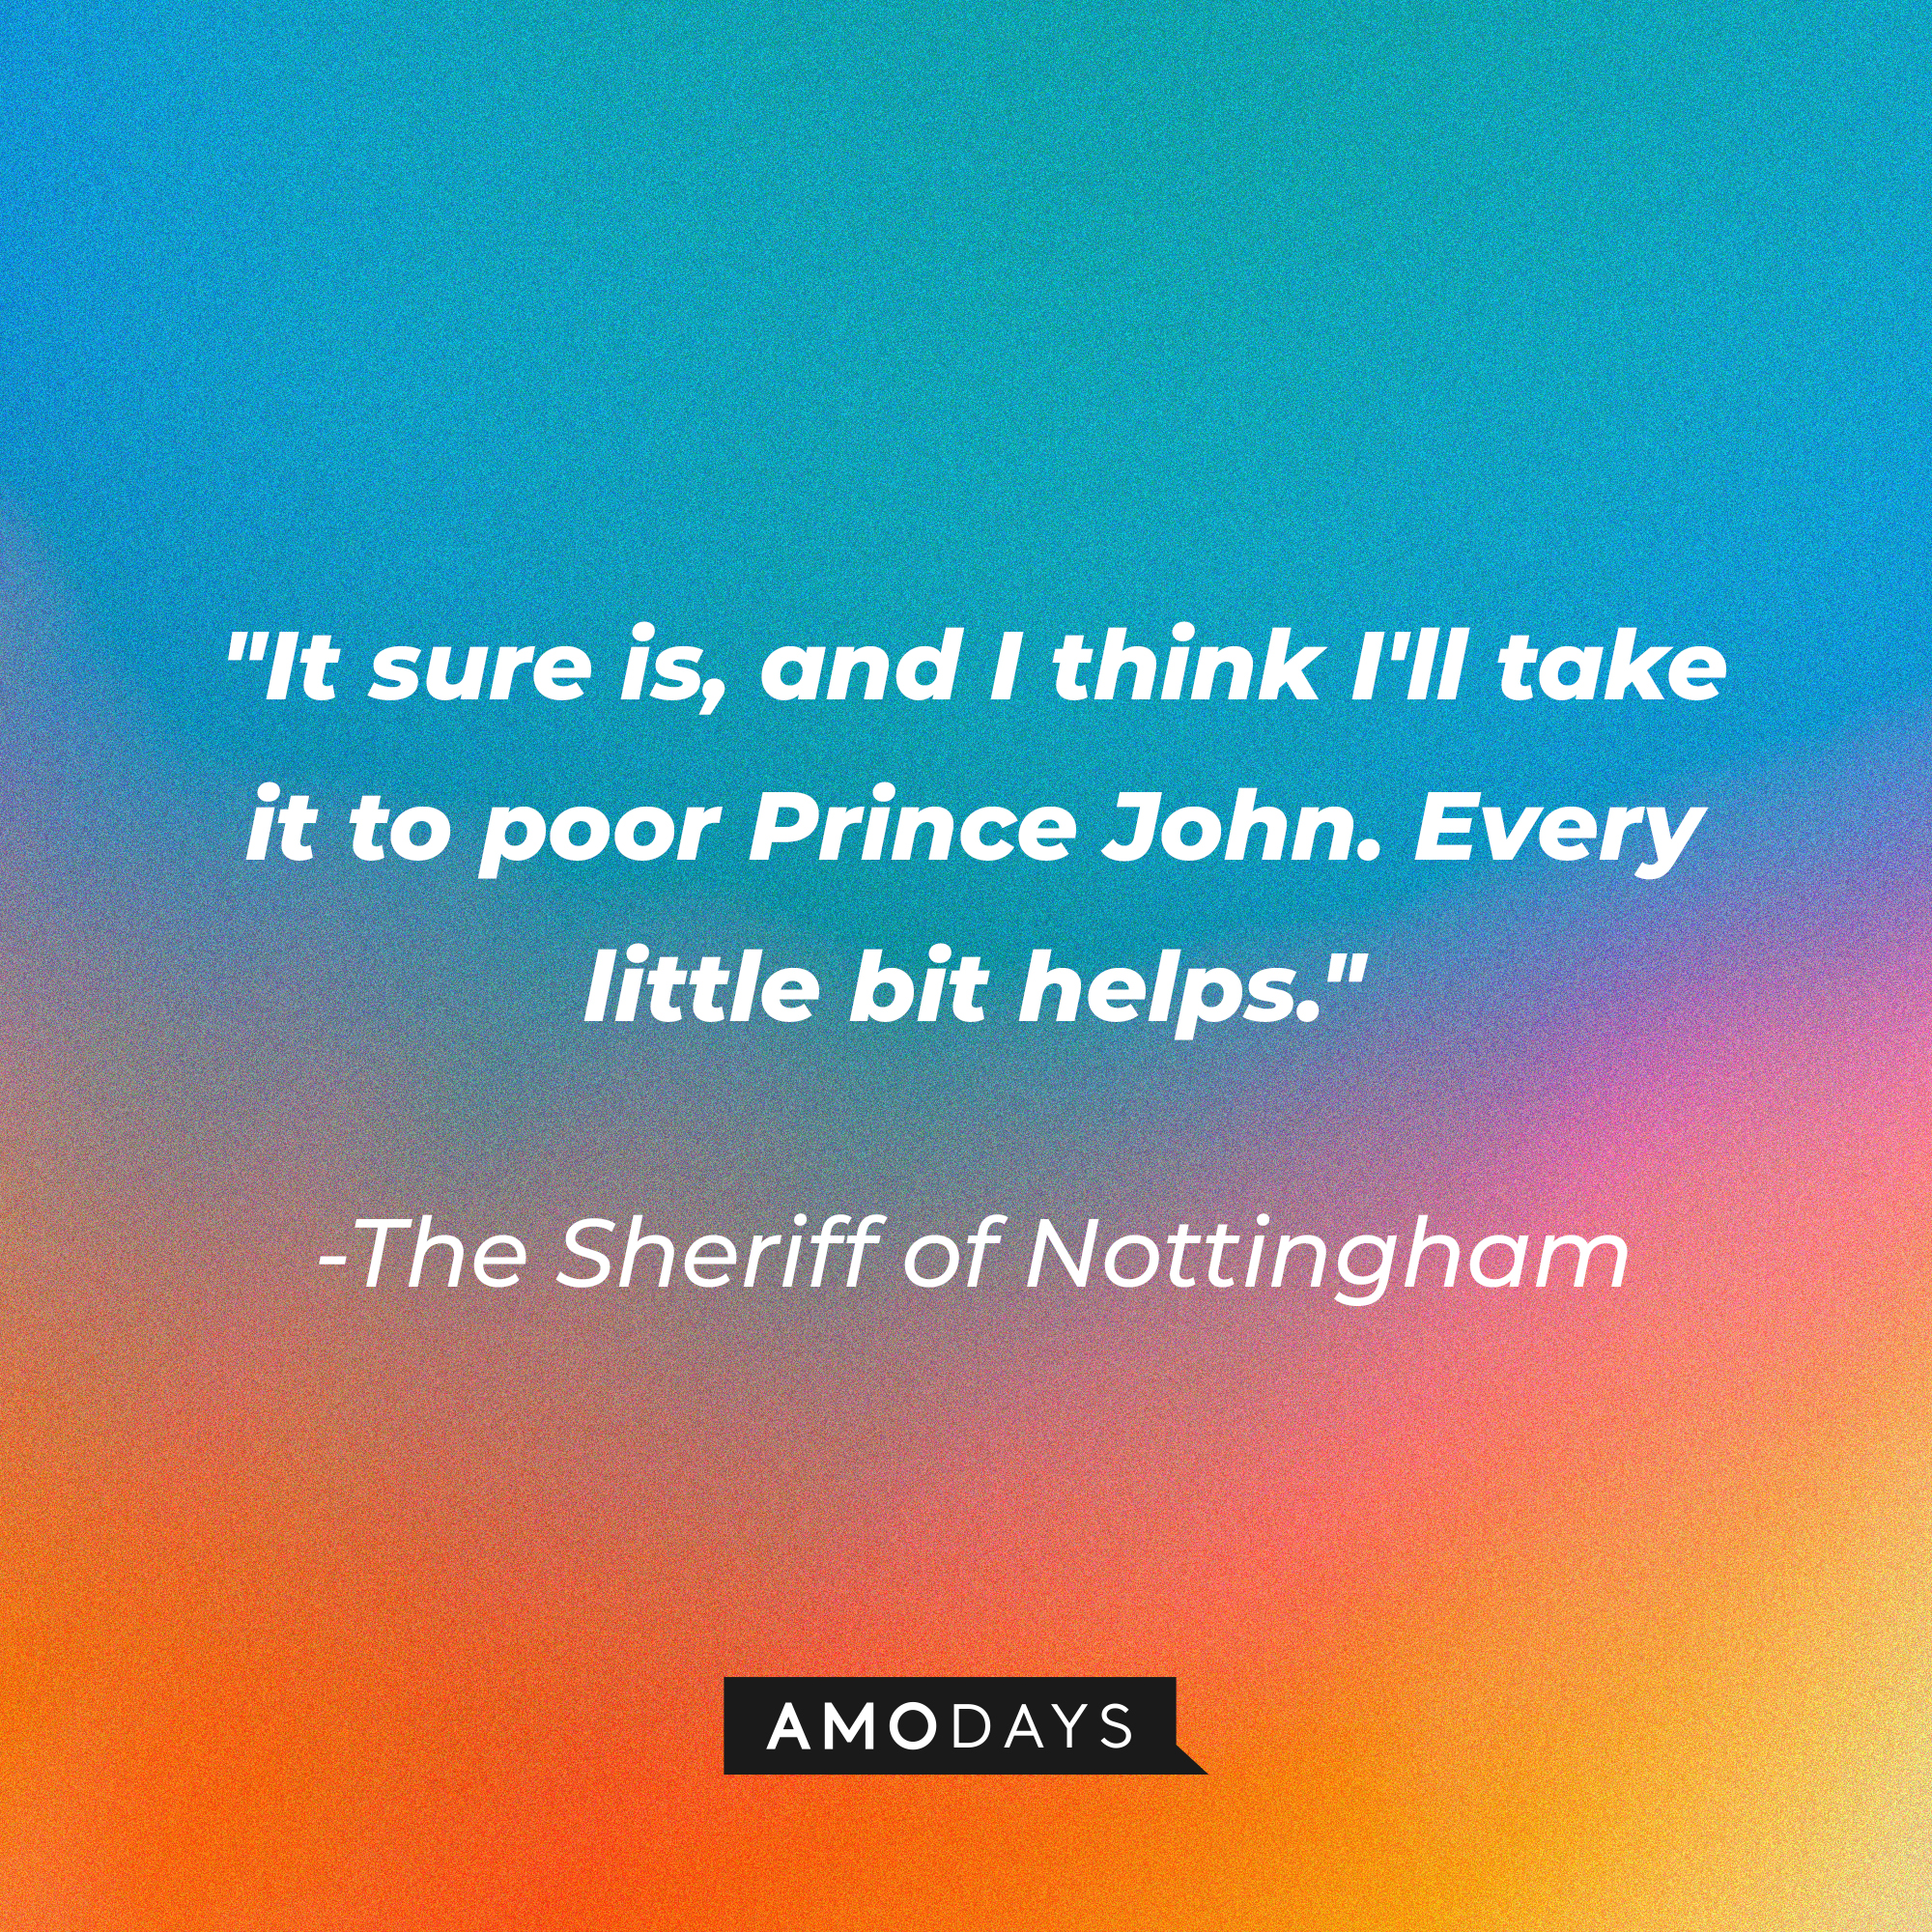 The Sheriff of Nottingham's quote: "It sure is, and I think I'll take it to poor Prince John. Every little bit helps." | Source: Amodays